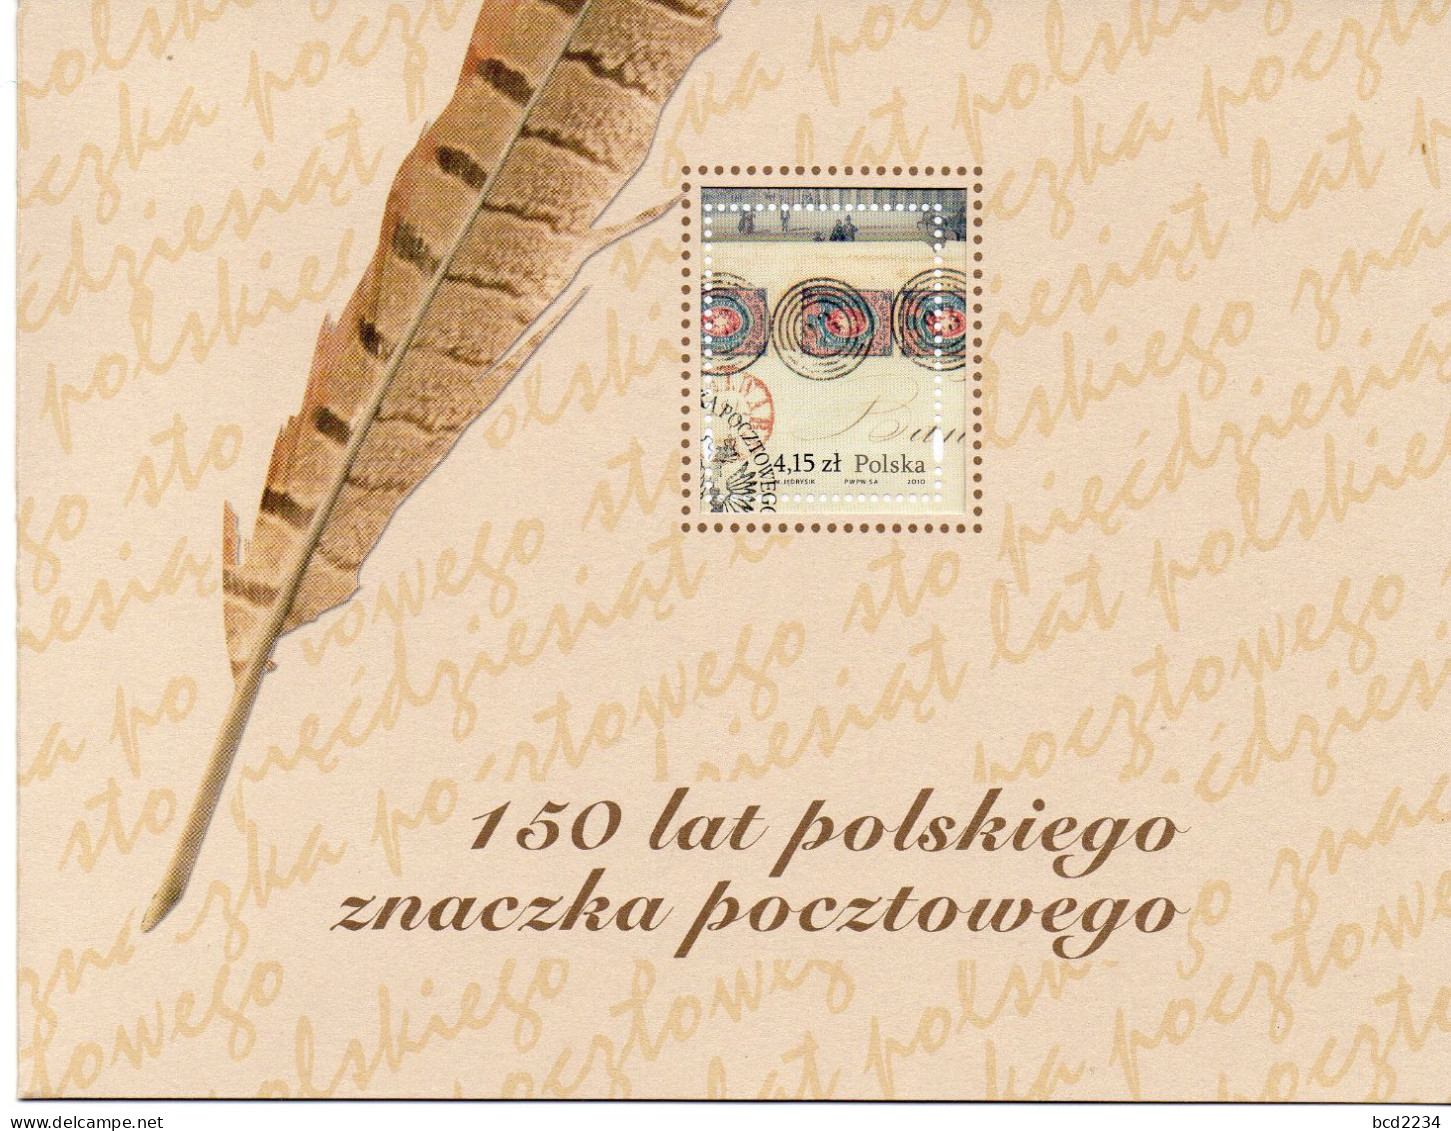 POLAND 2010 POLISH POST OFFICE LIMITED EDITION FOLDER: 150 YEARS ANNIVERSARY 1860 FIRST POLISH STAMP FDC & MS & ENVELOPE - FDC